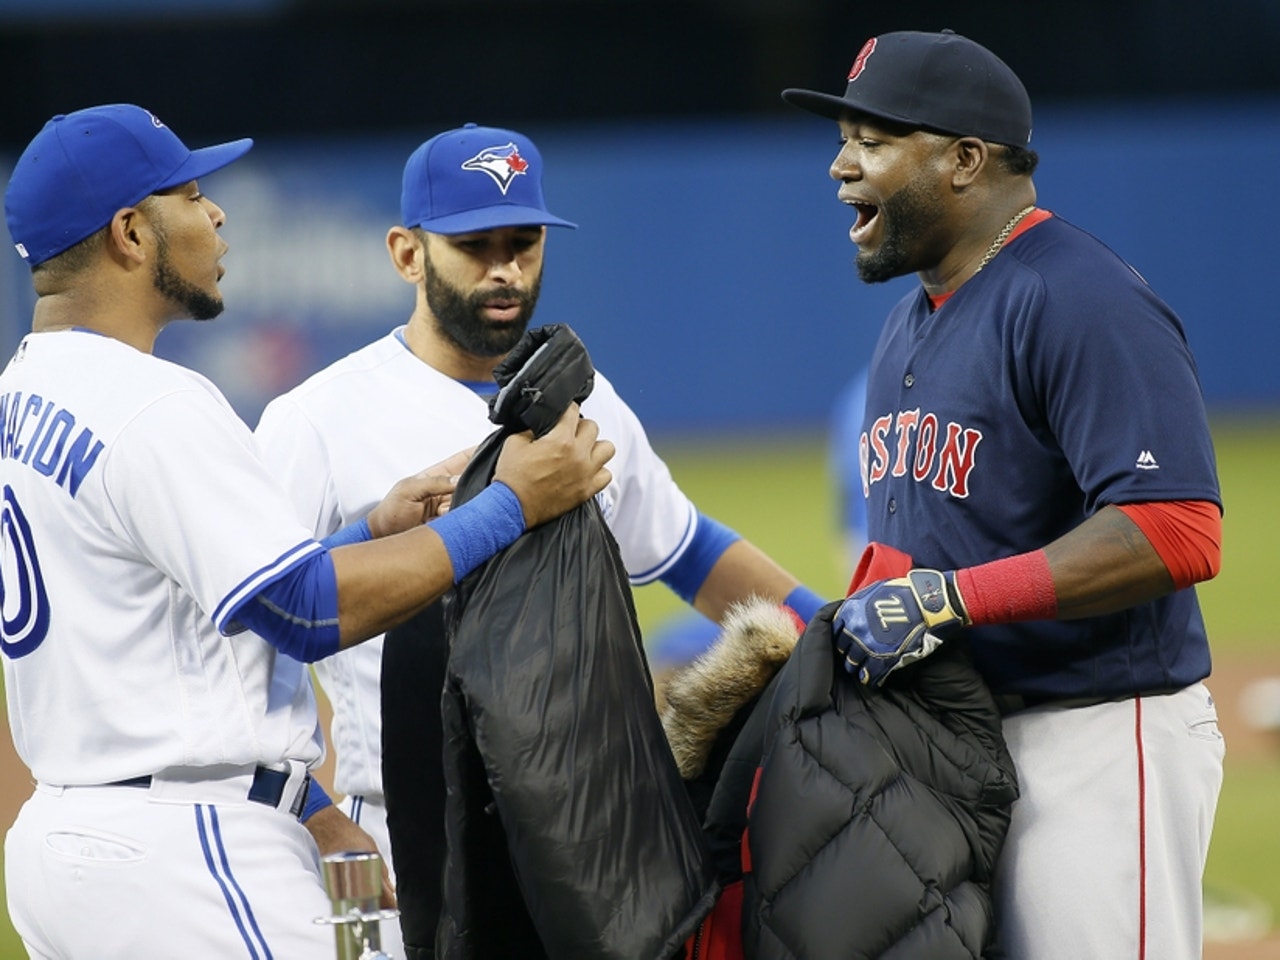 Blue Jays Encarnacion and Bautista warm up under red sky while the